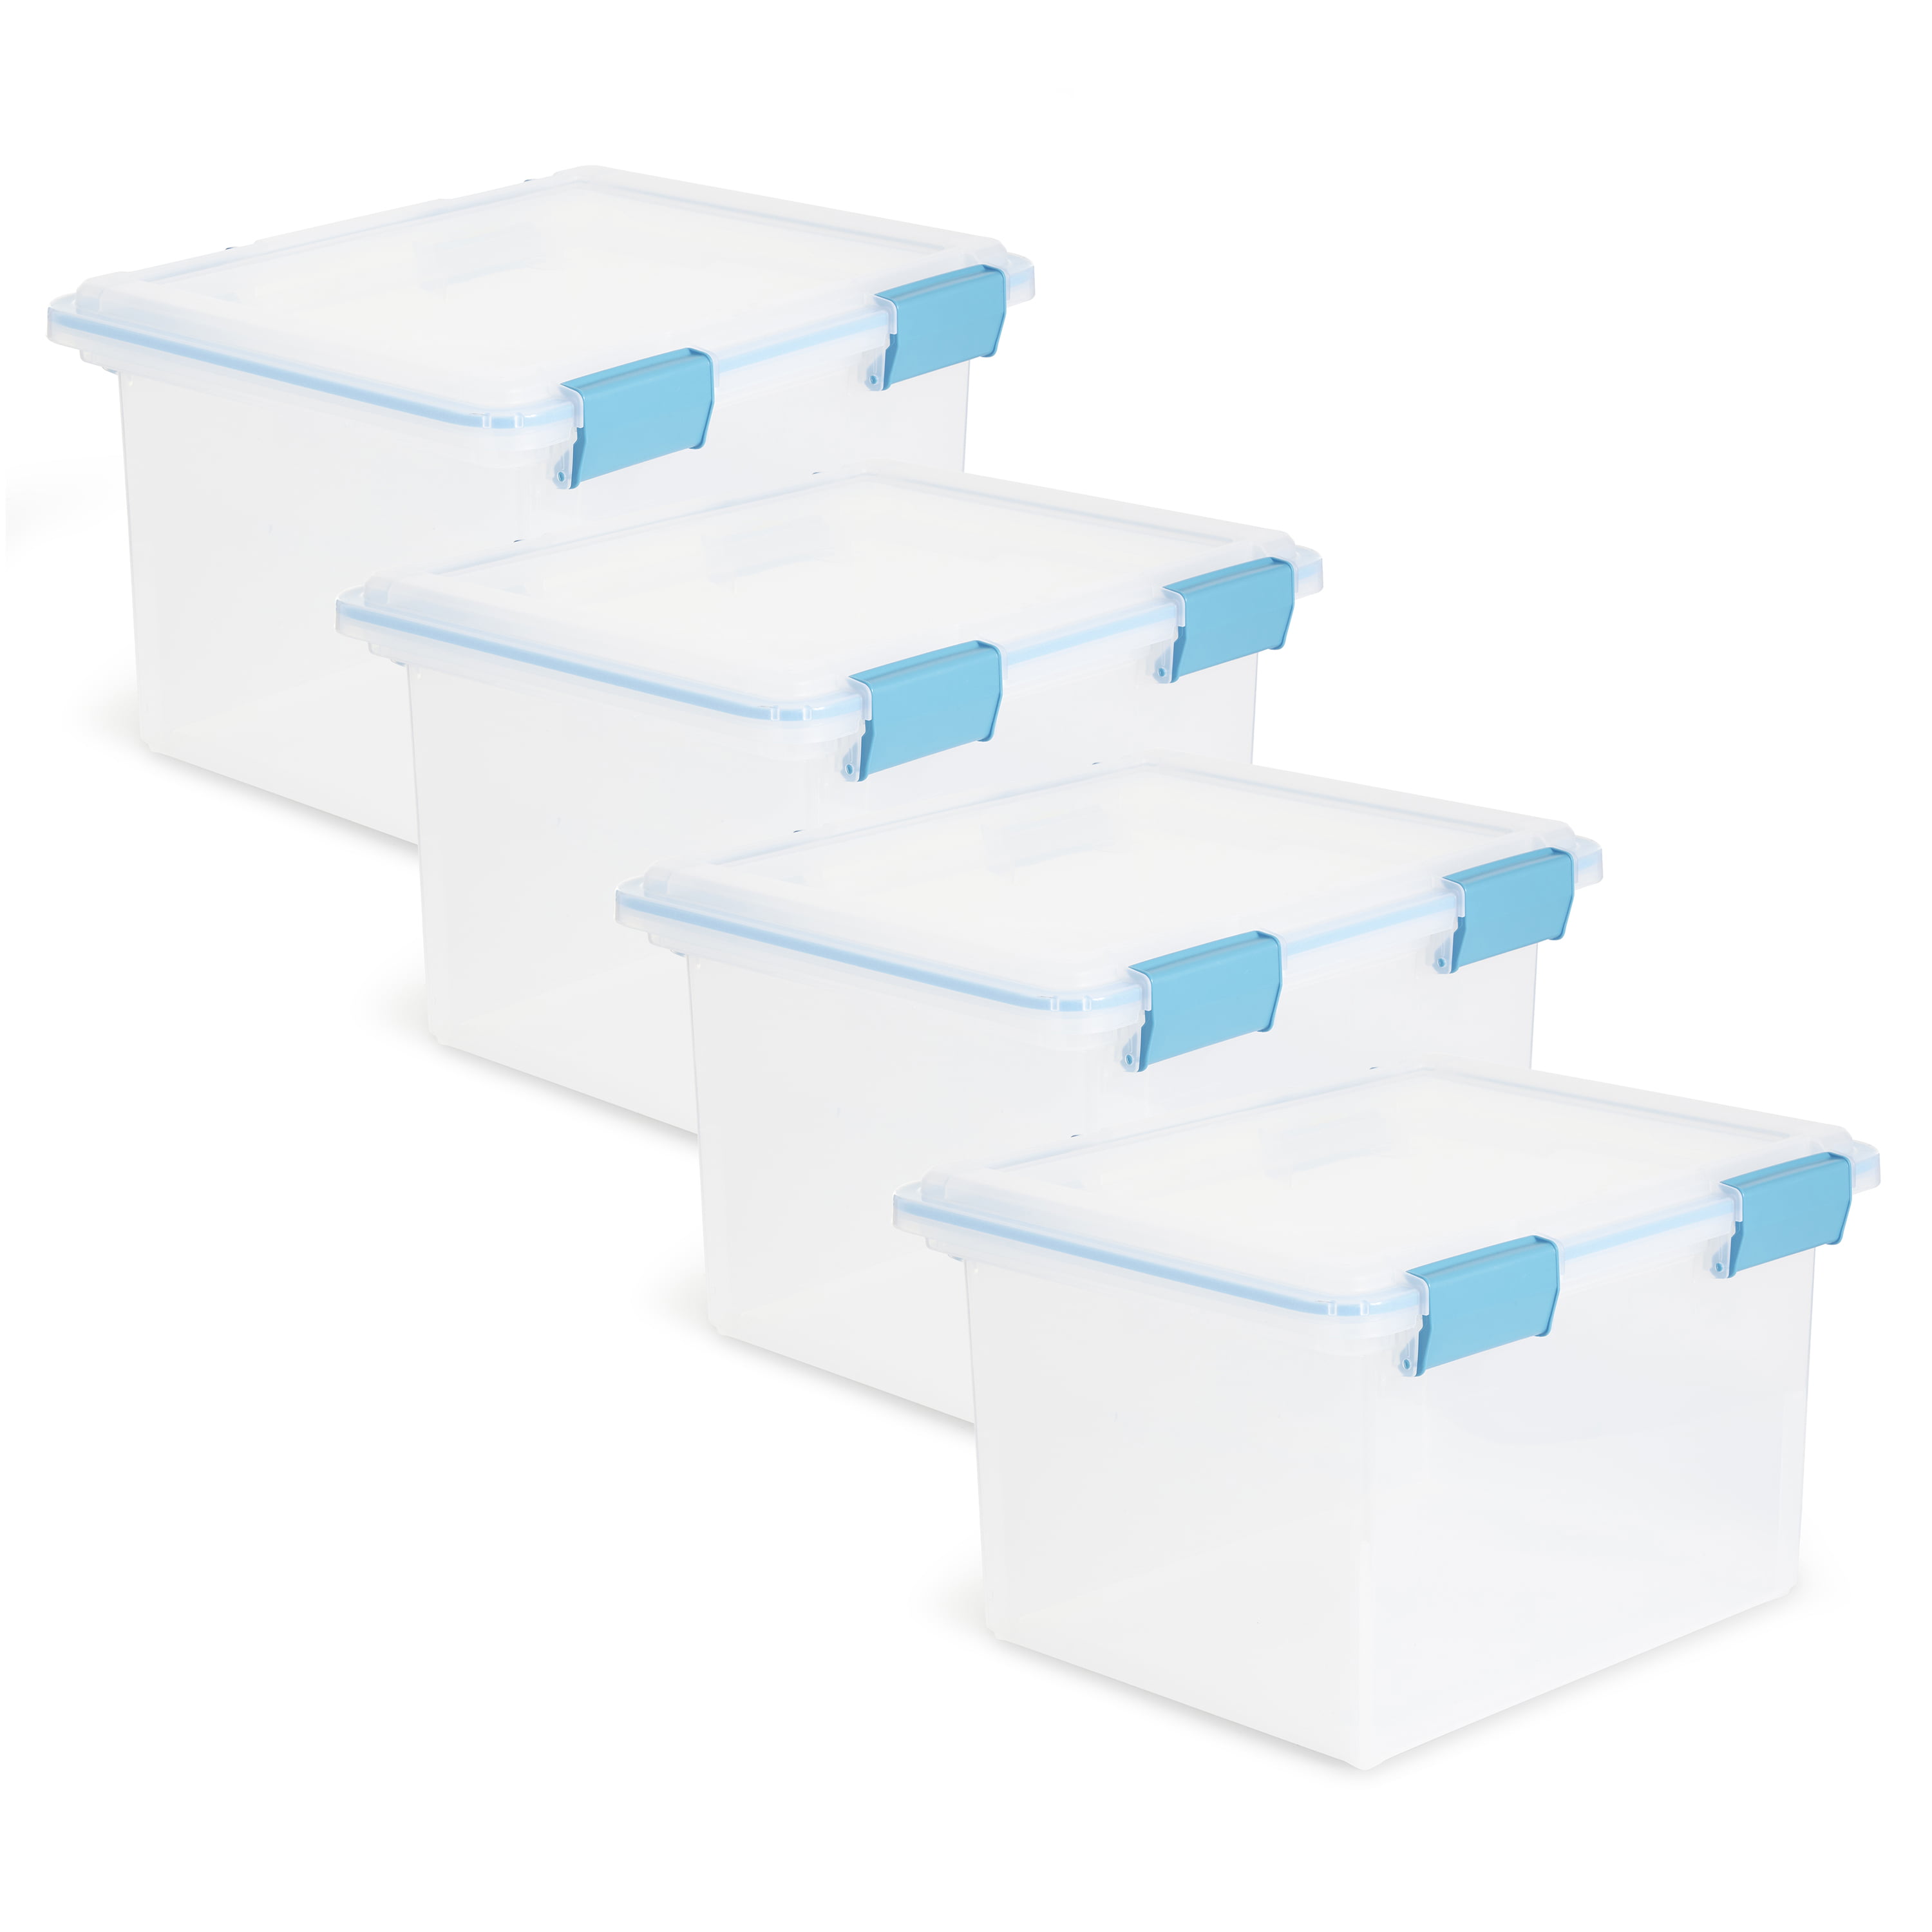 Storage Boxes Stacking Boxes view stock boxes view Camp Box Bins Stacking Grey 